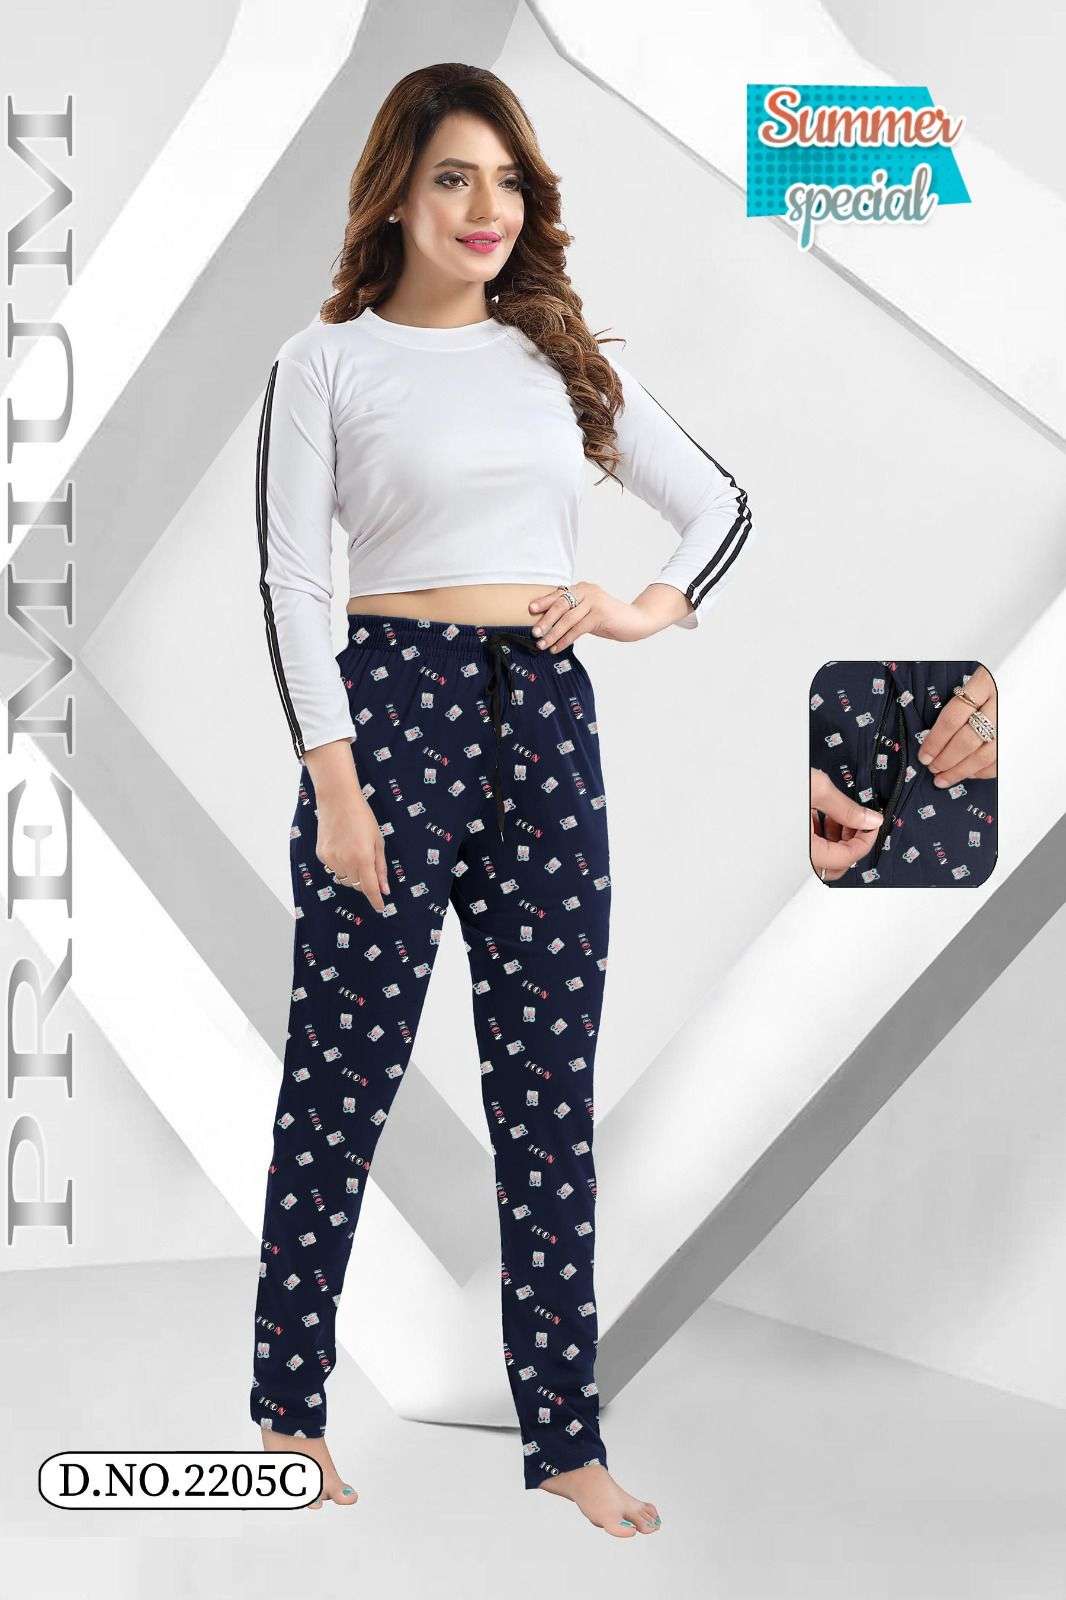 SUMMER SPECIAL NIGHT PANT VOL.3205 Heavy Shinker Hosiery Cotton Night Pant With Pocket With Ziper Pocket ONLY PANT CATALOG WHOLESALER BEST RATE